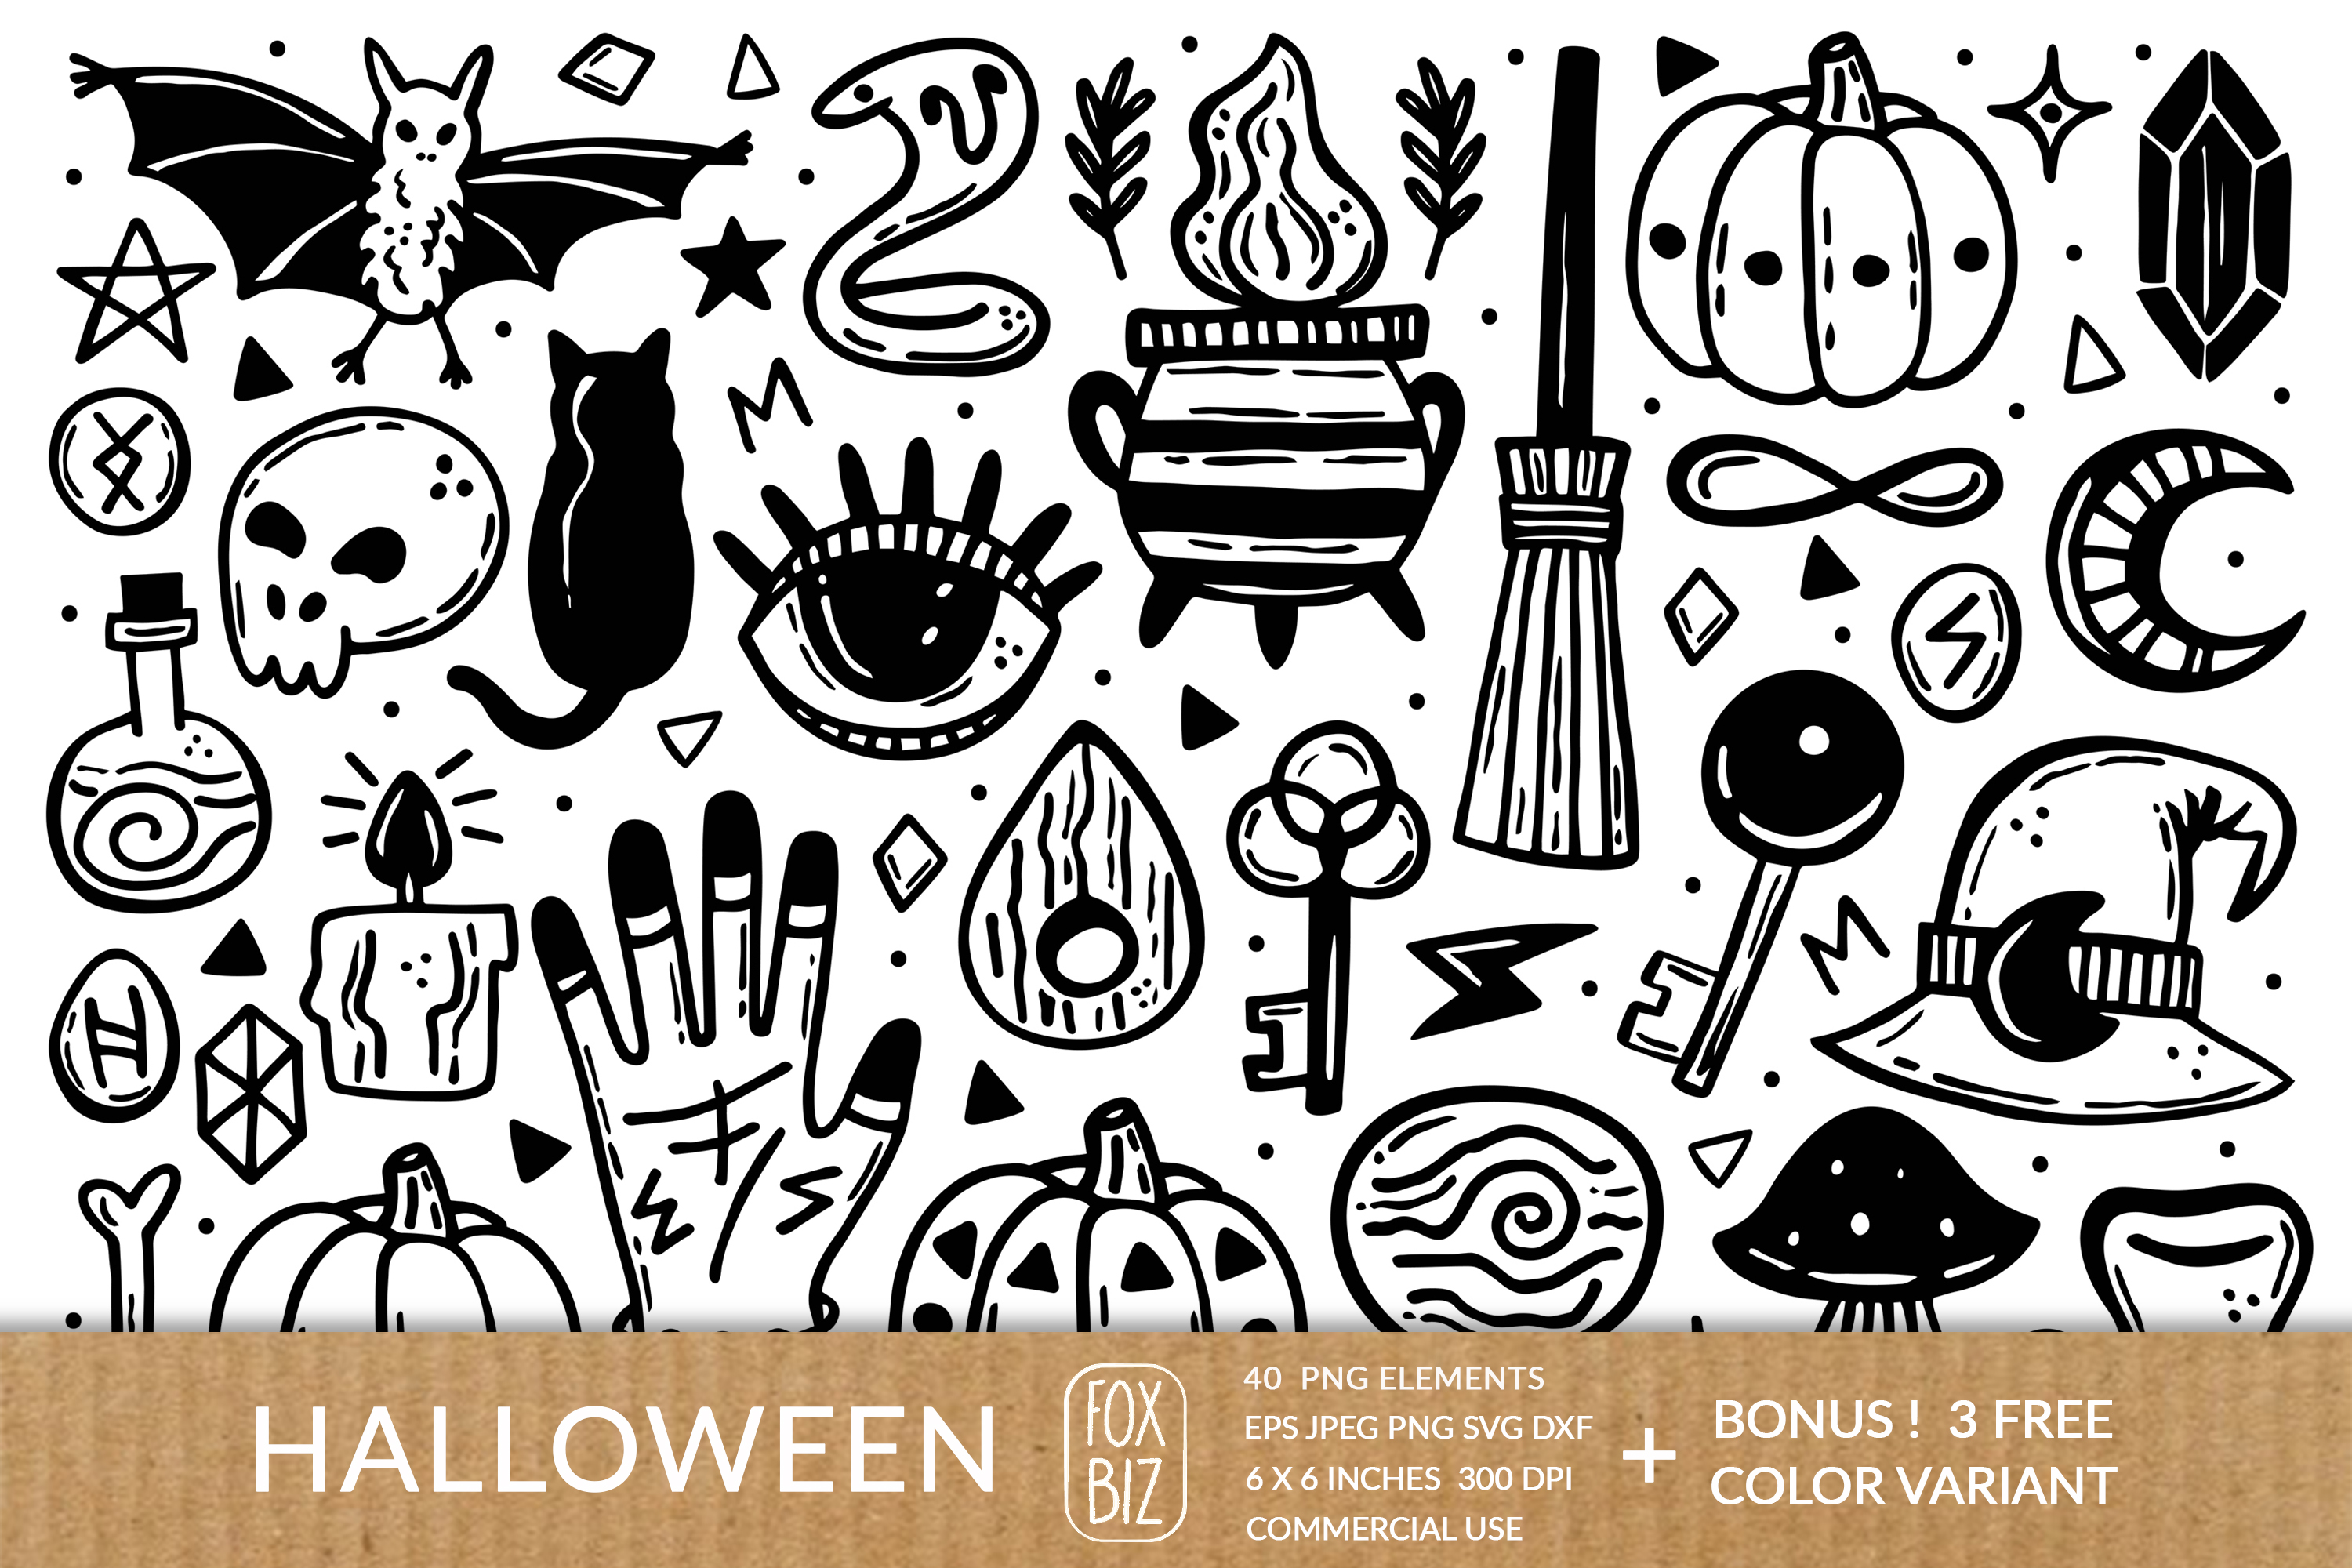 Download Ink Halloween Graphic By Foxbiz Creative Fabrica Yellowimages Mockups